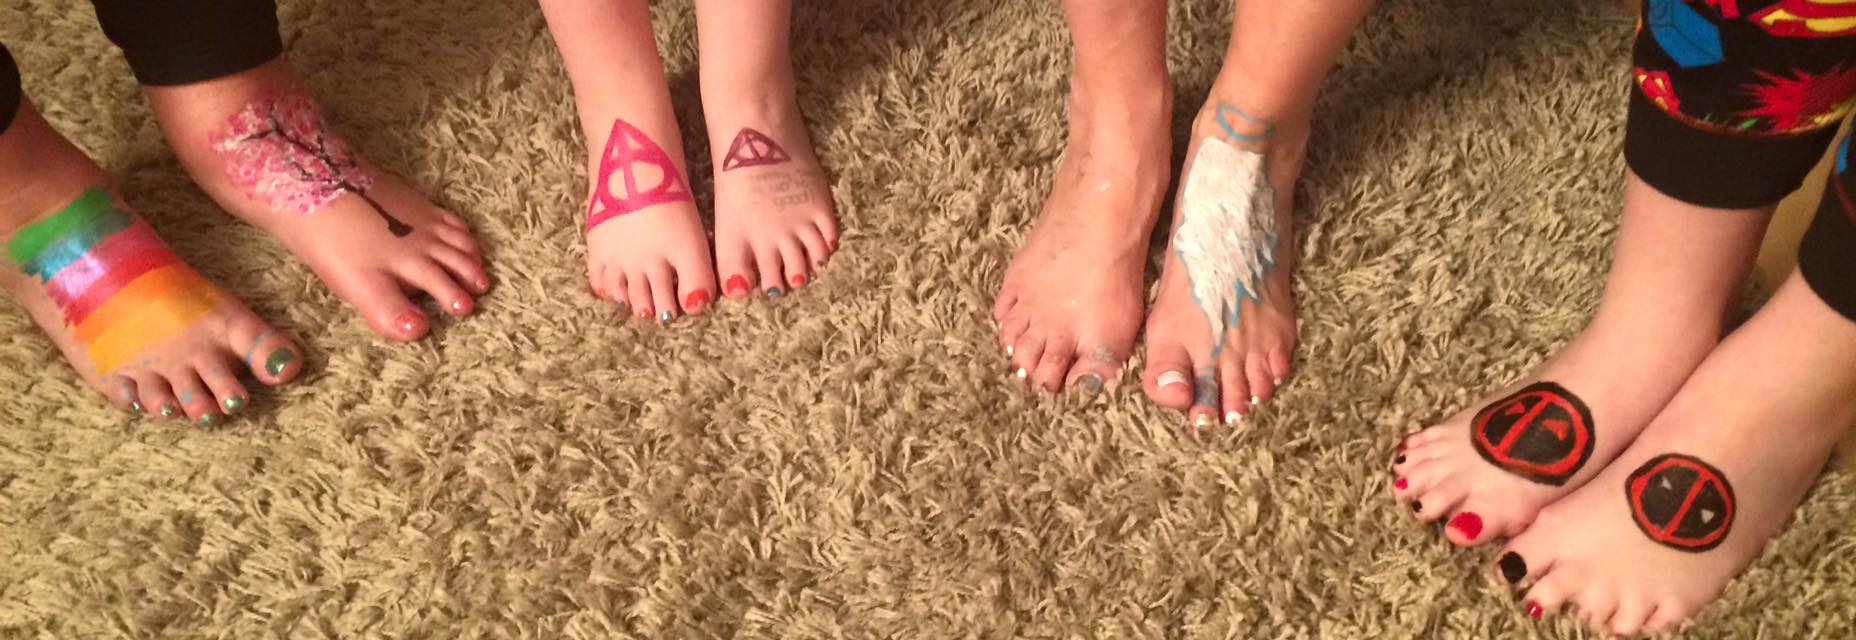 Children's feet painted with symbols